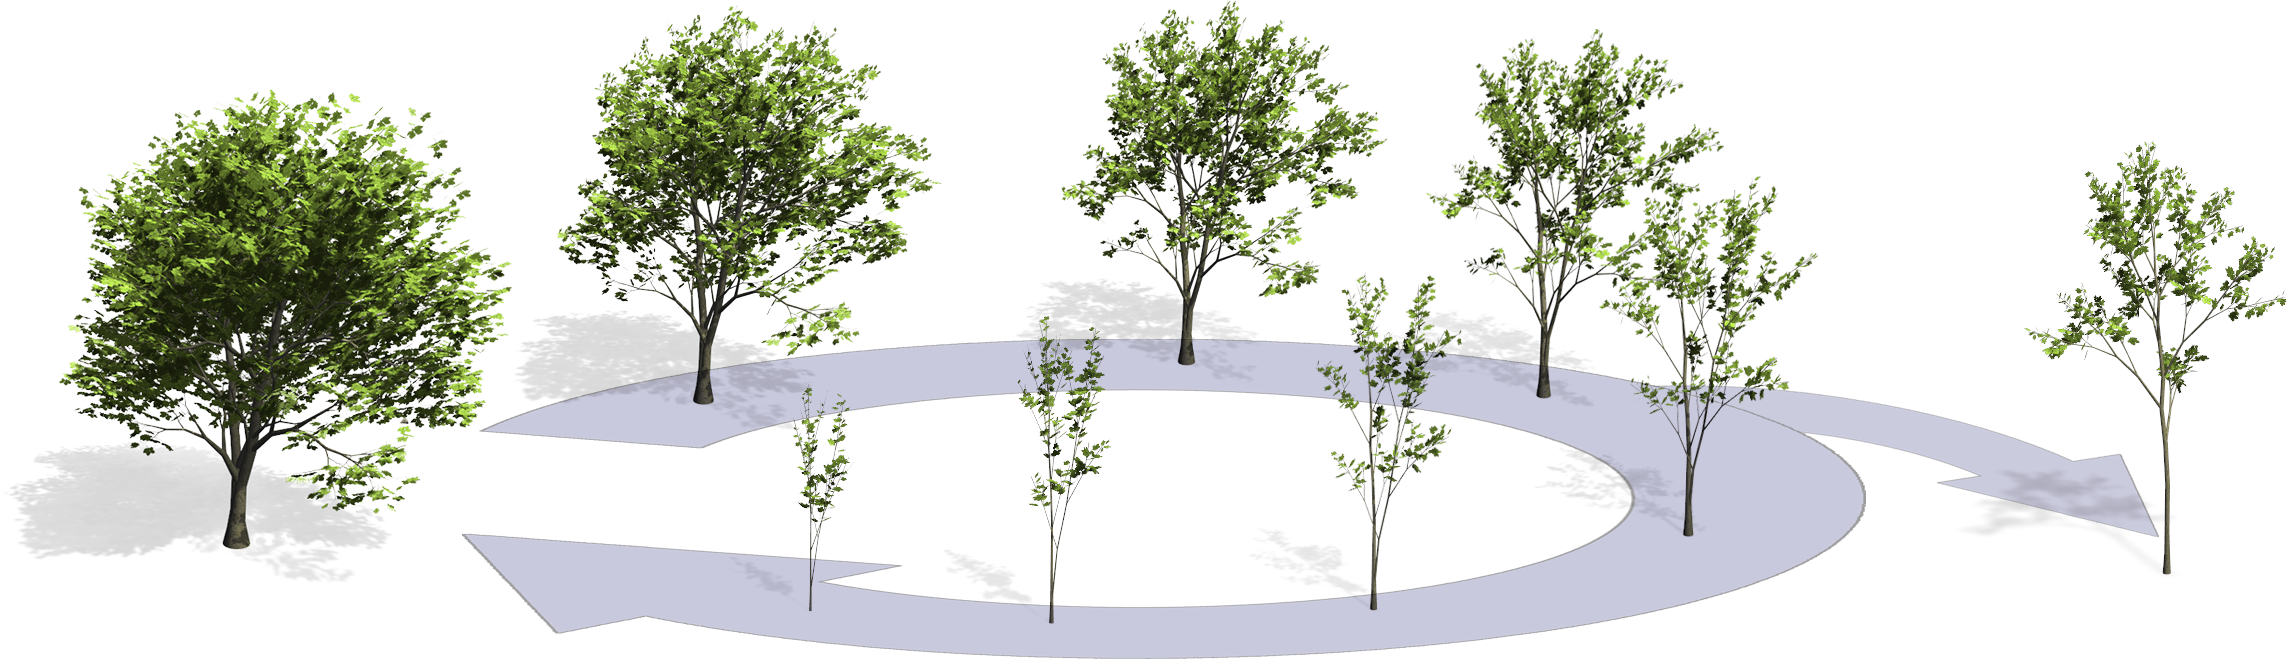 Teaser of Capturing and Animating the Morphogenesis of Polygonal Tree Models